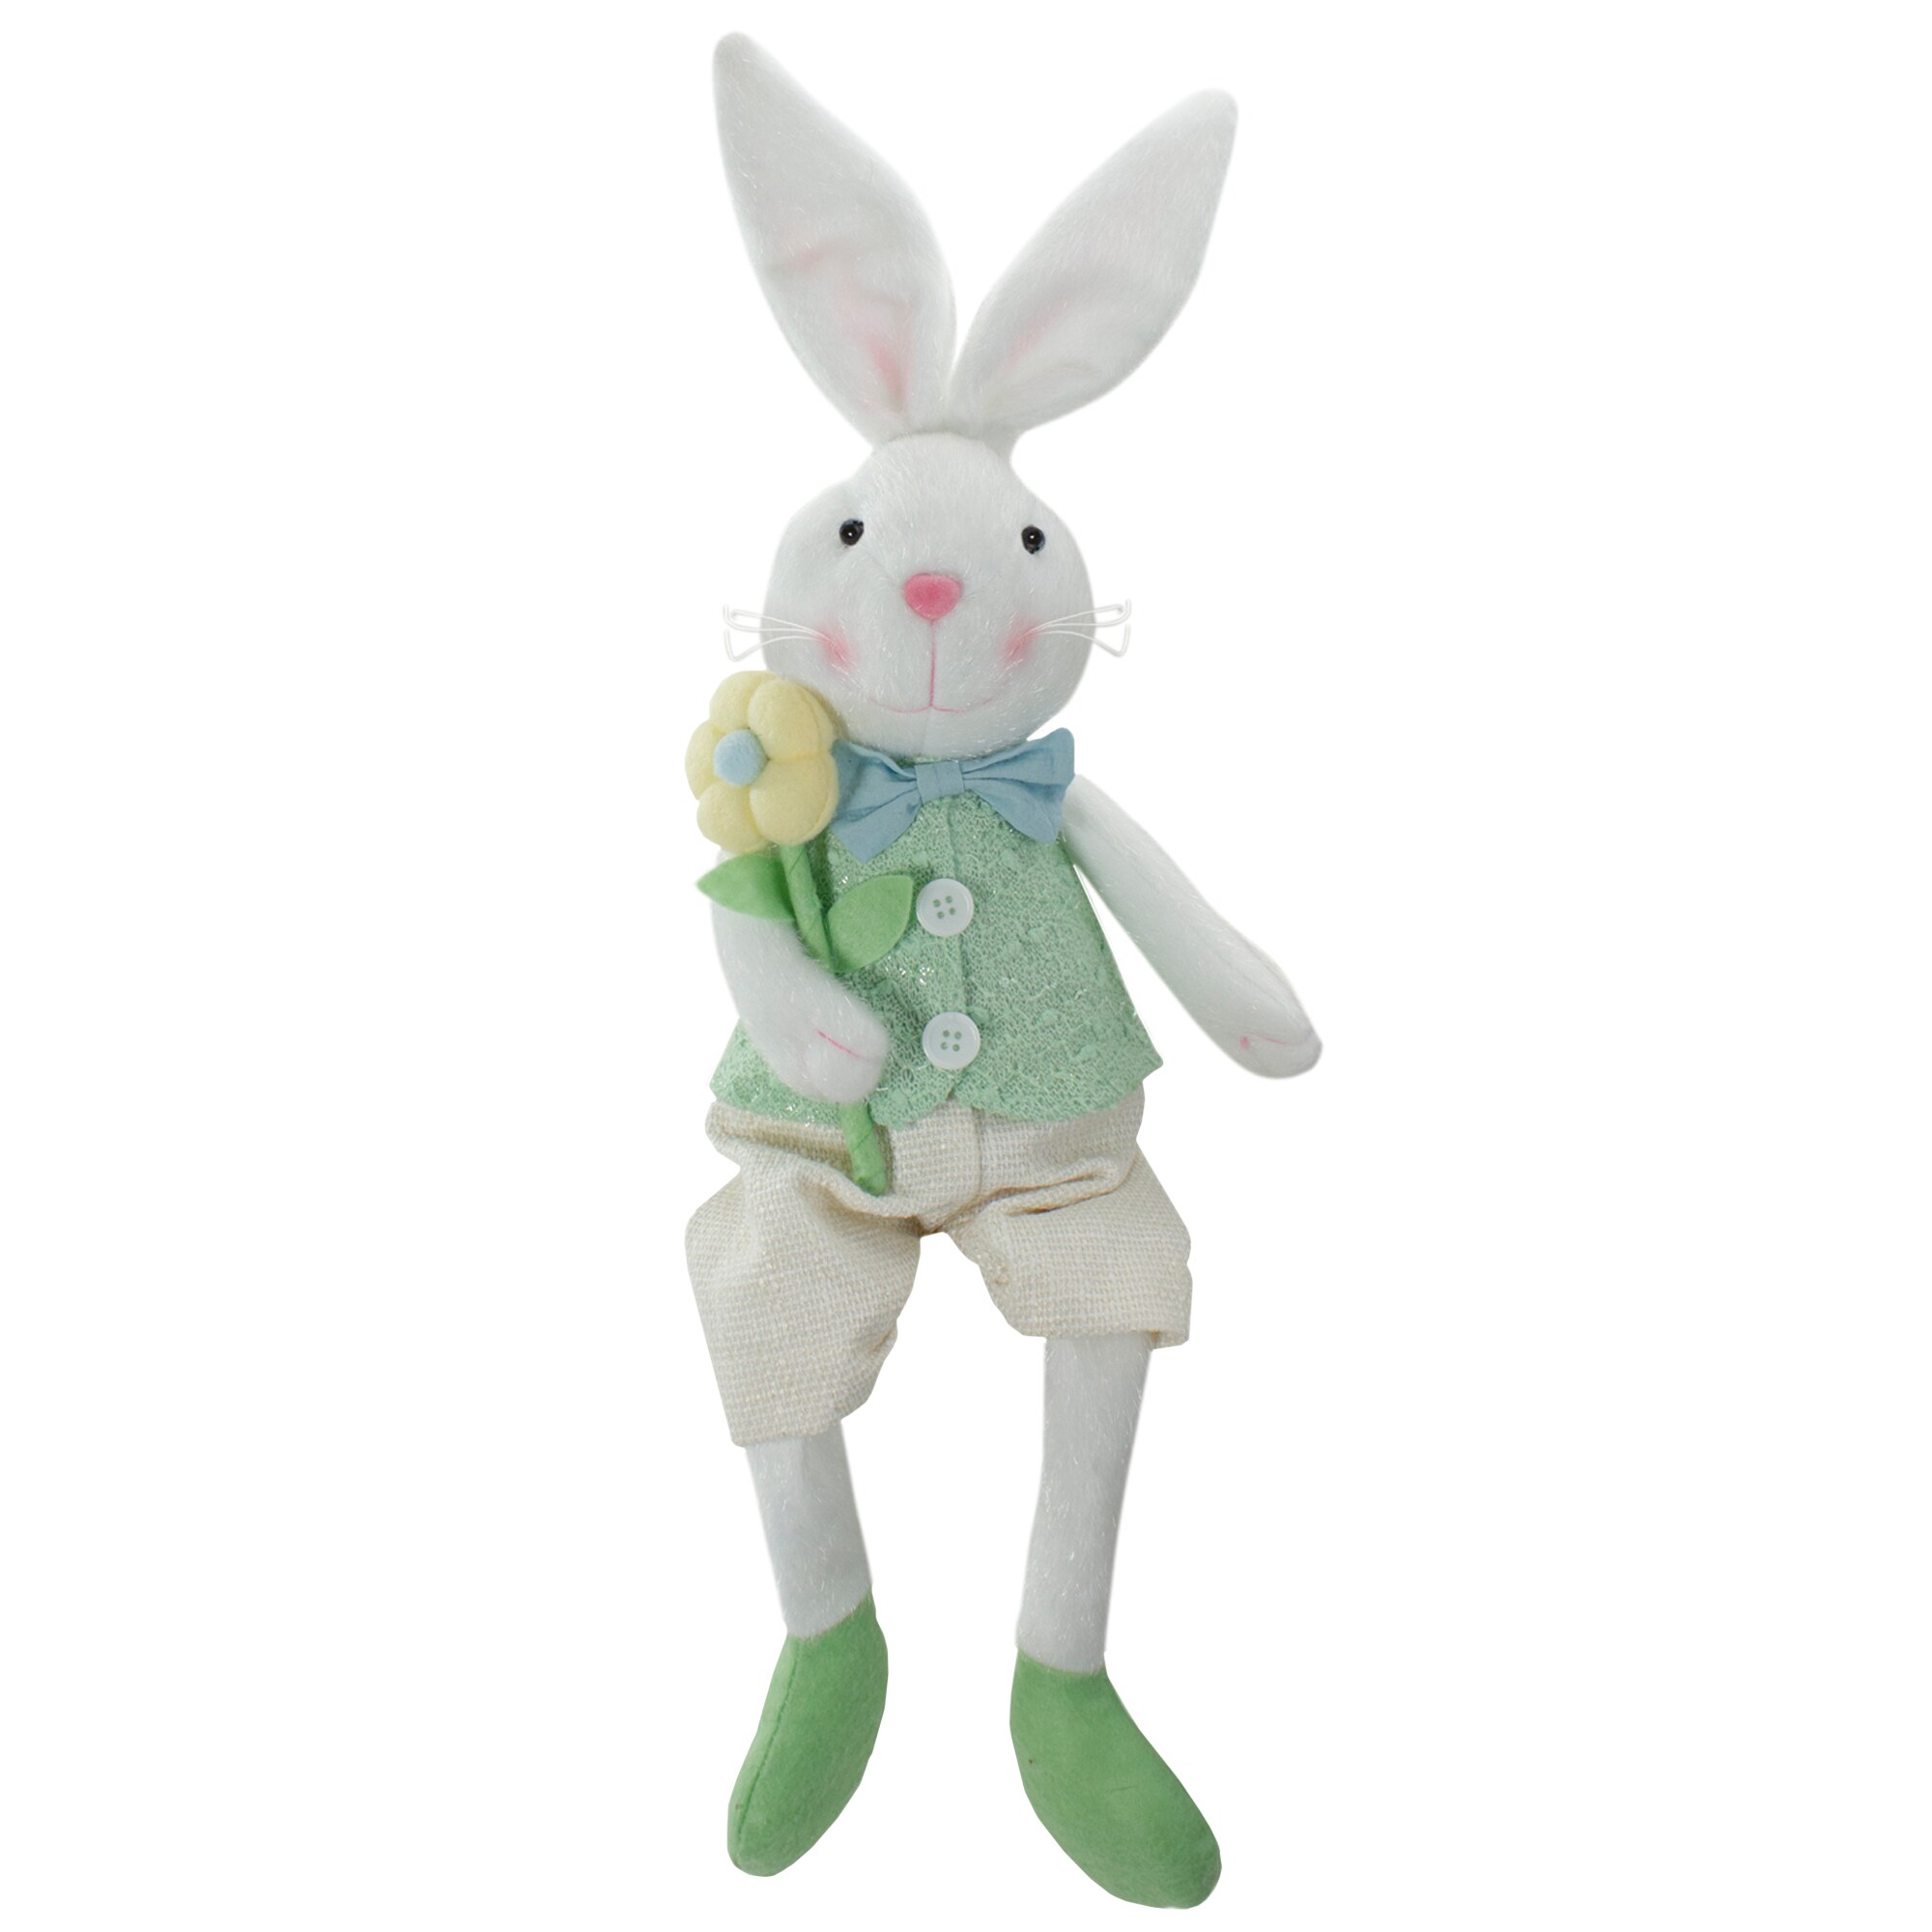 7 INCH CREAM PLUSH WEIGHTED EASTER BUNNY RABBIT SWEET BASKET DECORATION SPRING 